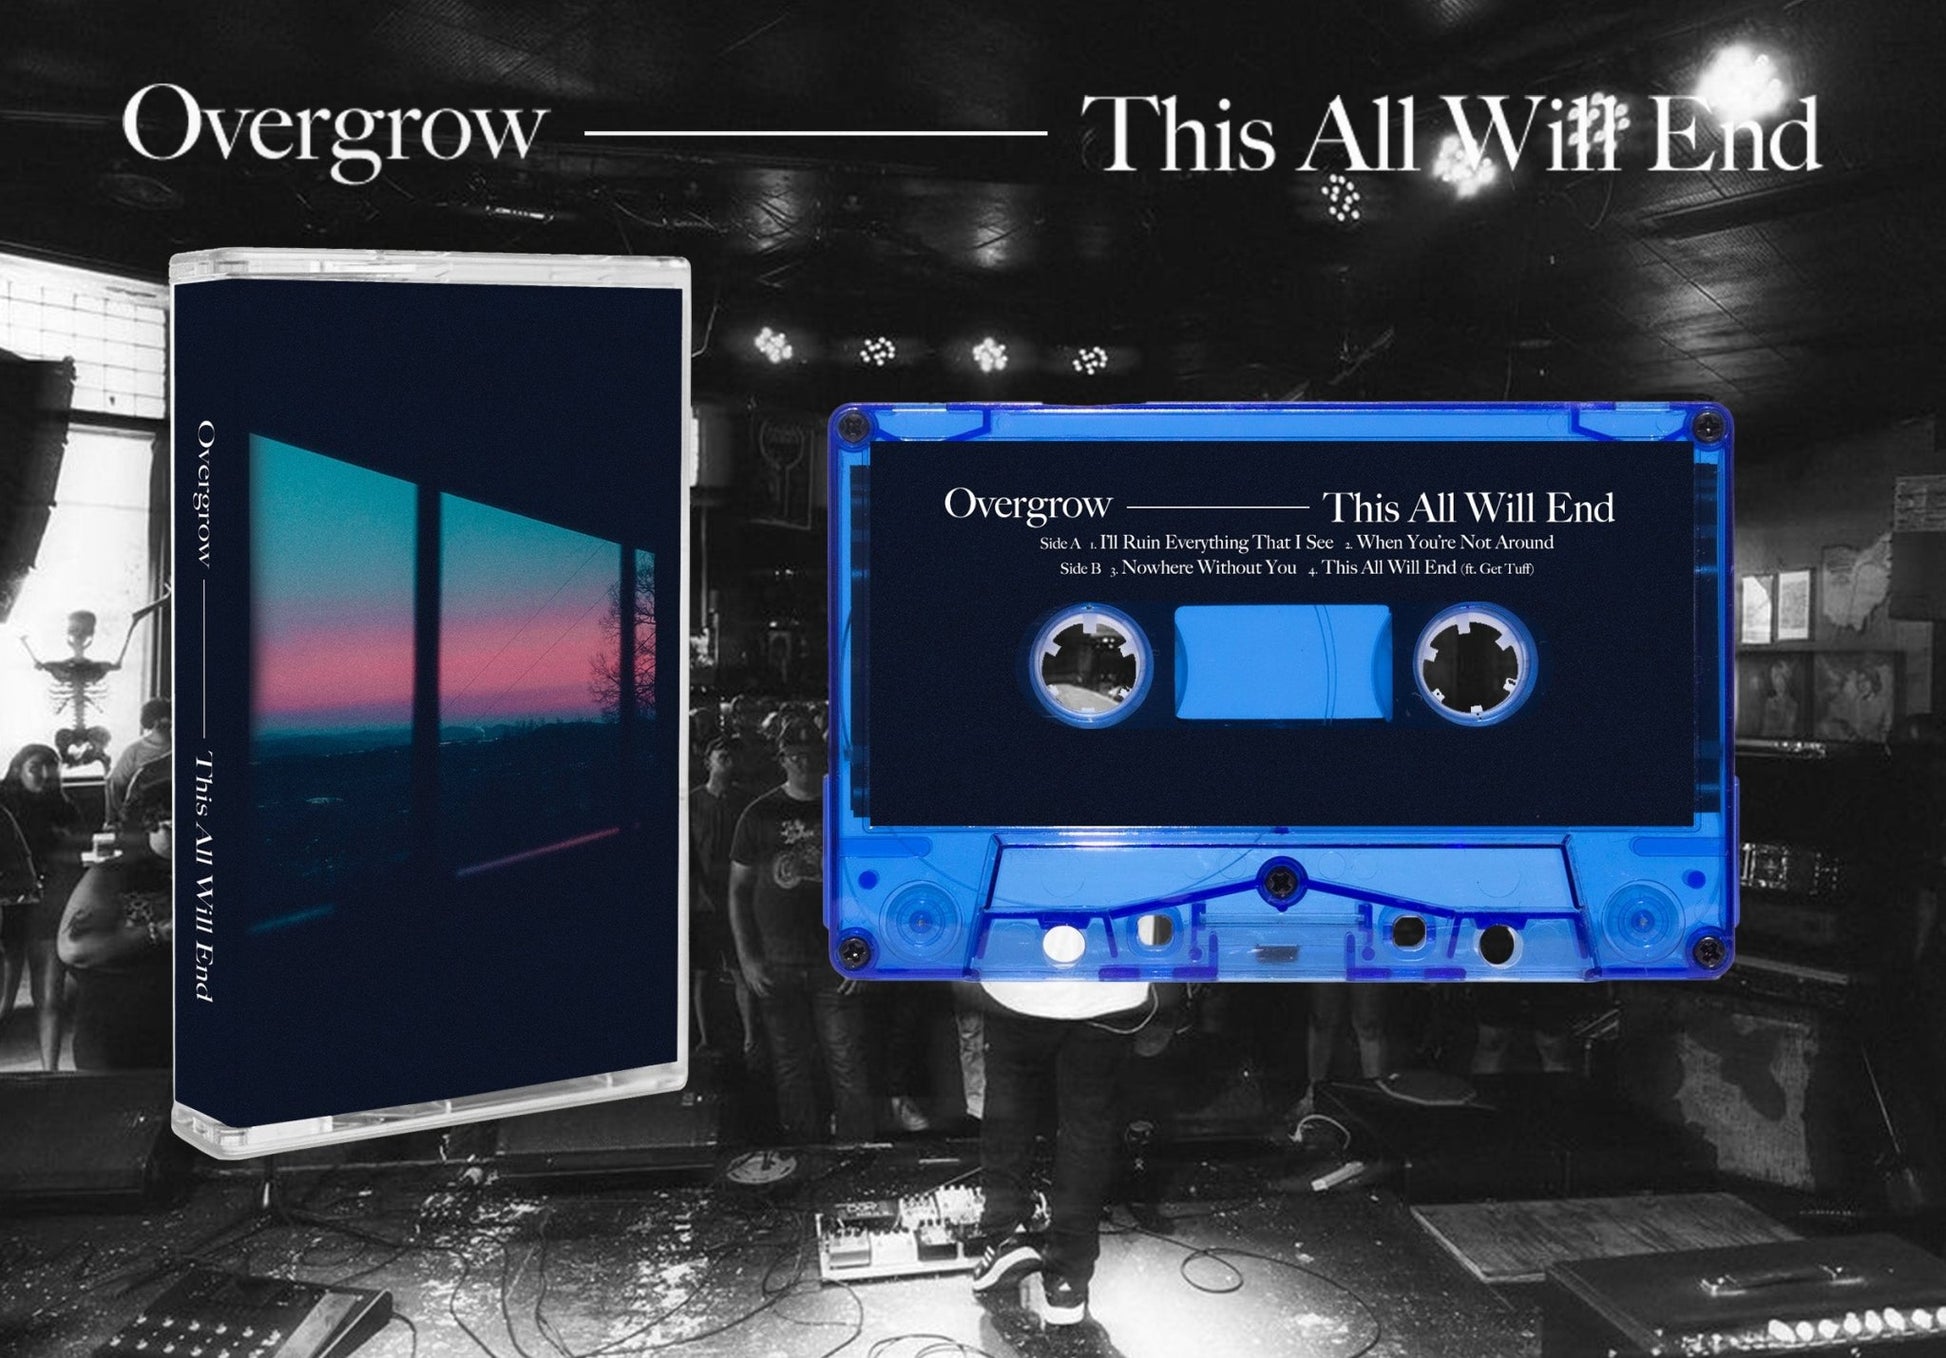 Overgrow - "This All Will End" - Acrobat Unstable Records